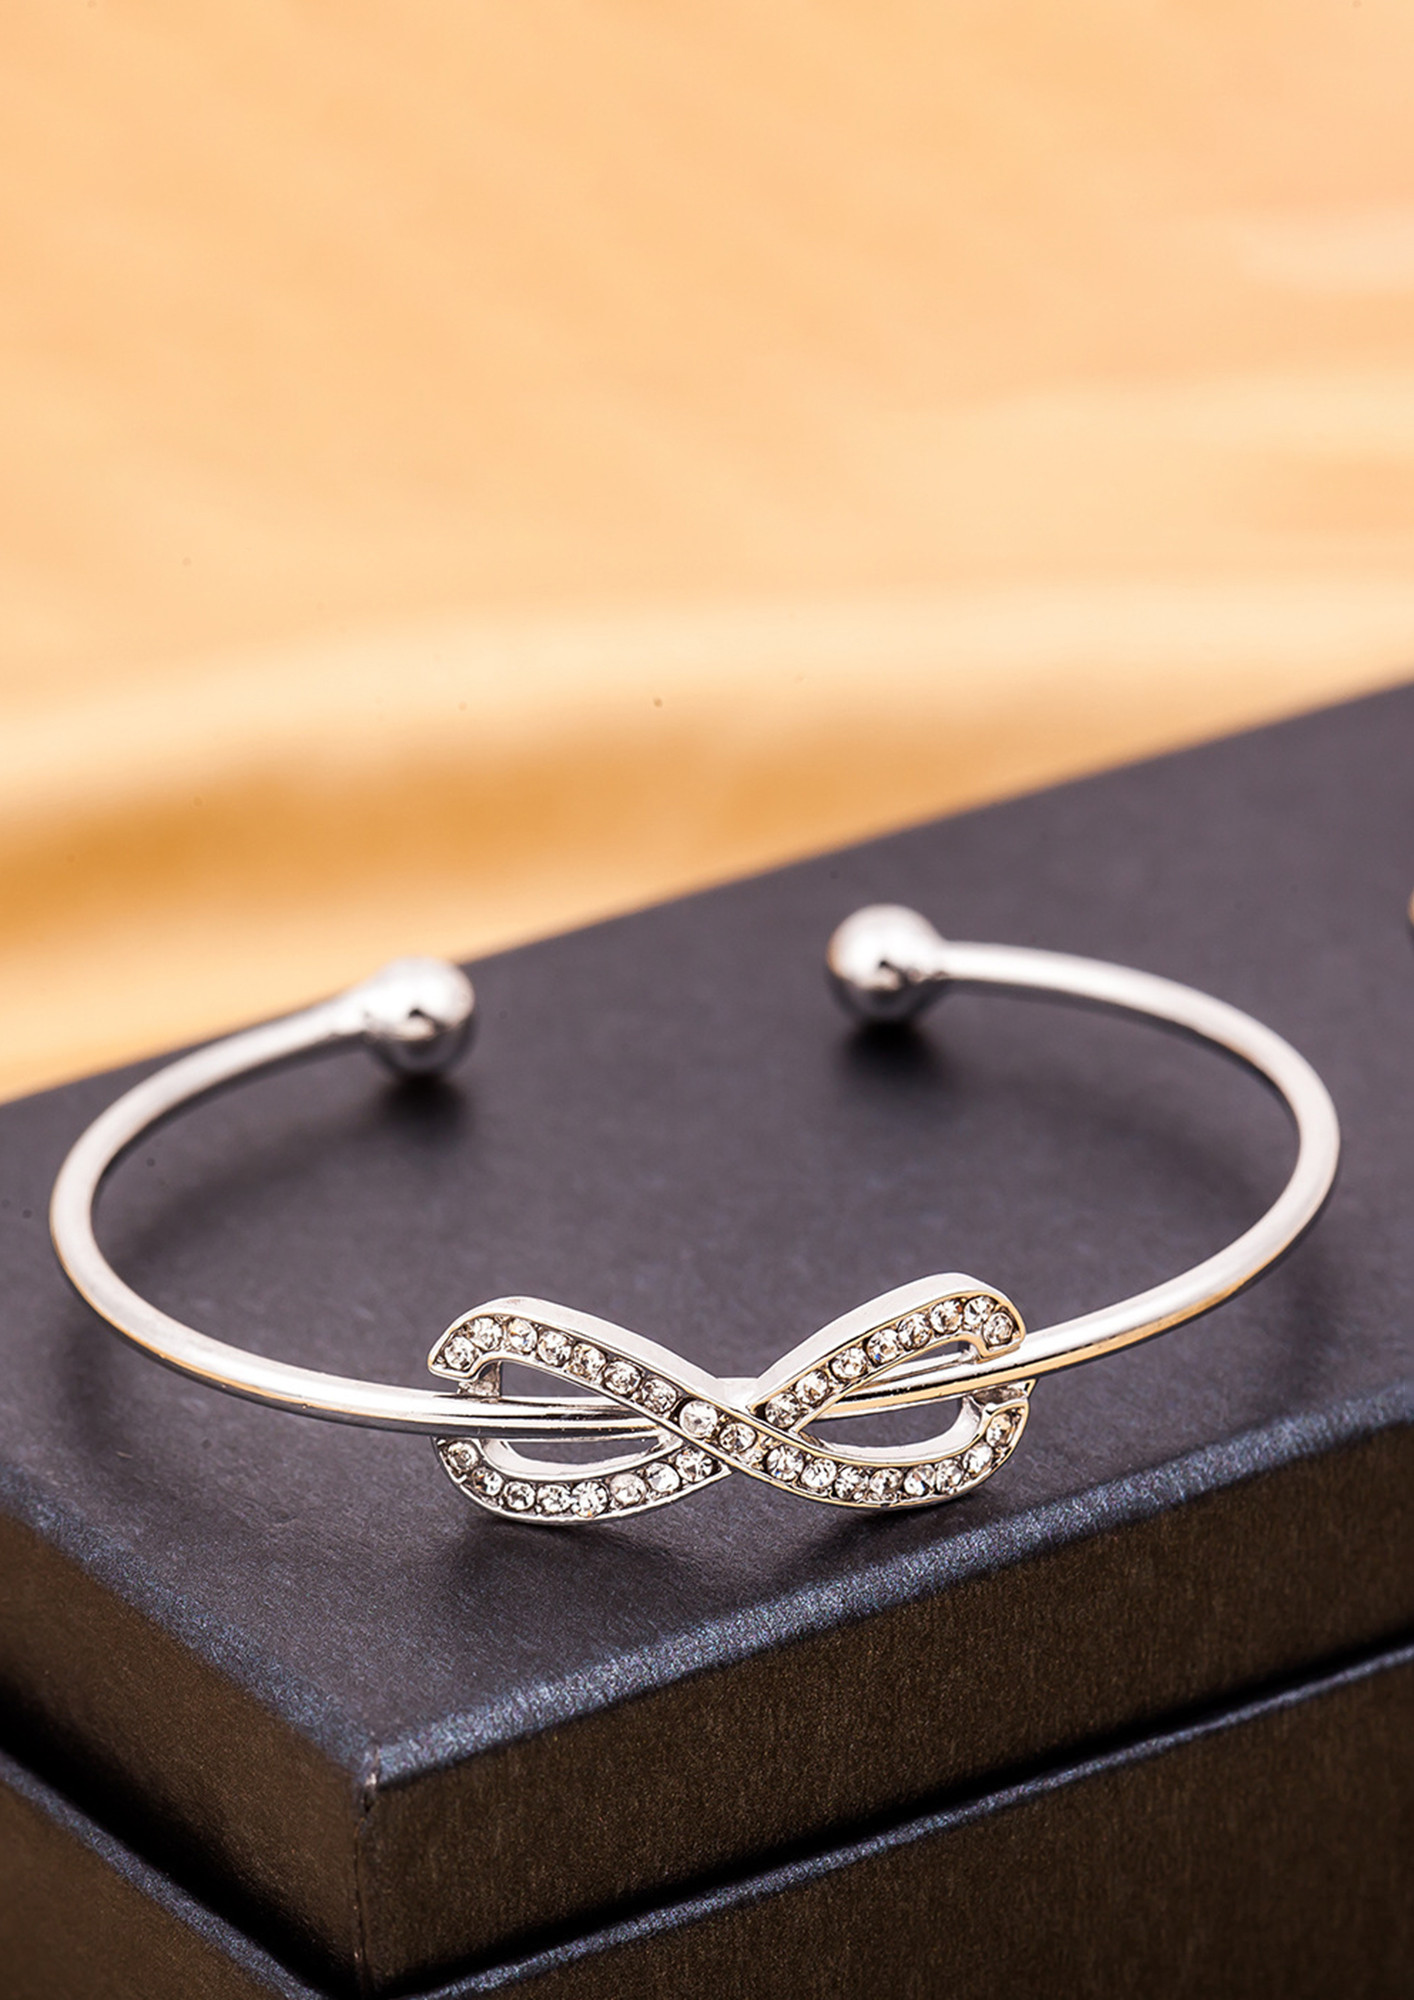 TO INFINITY AND BEYOND SILVER BRACELET